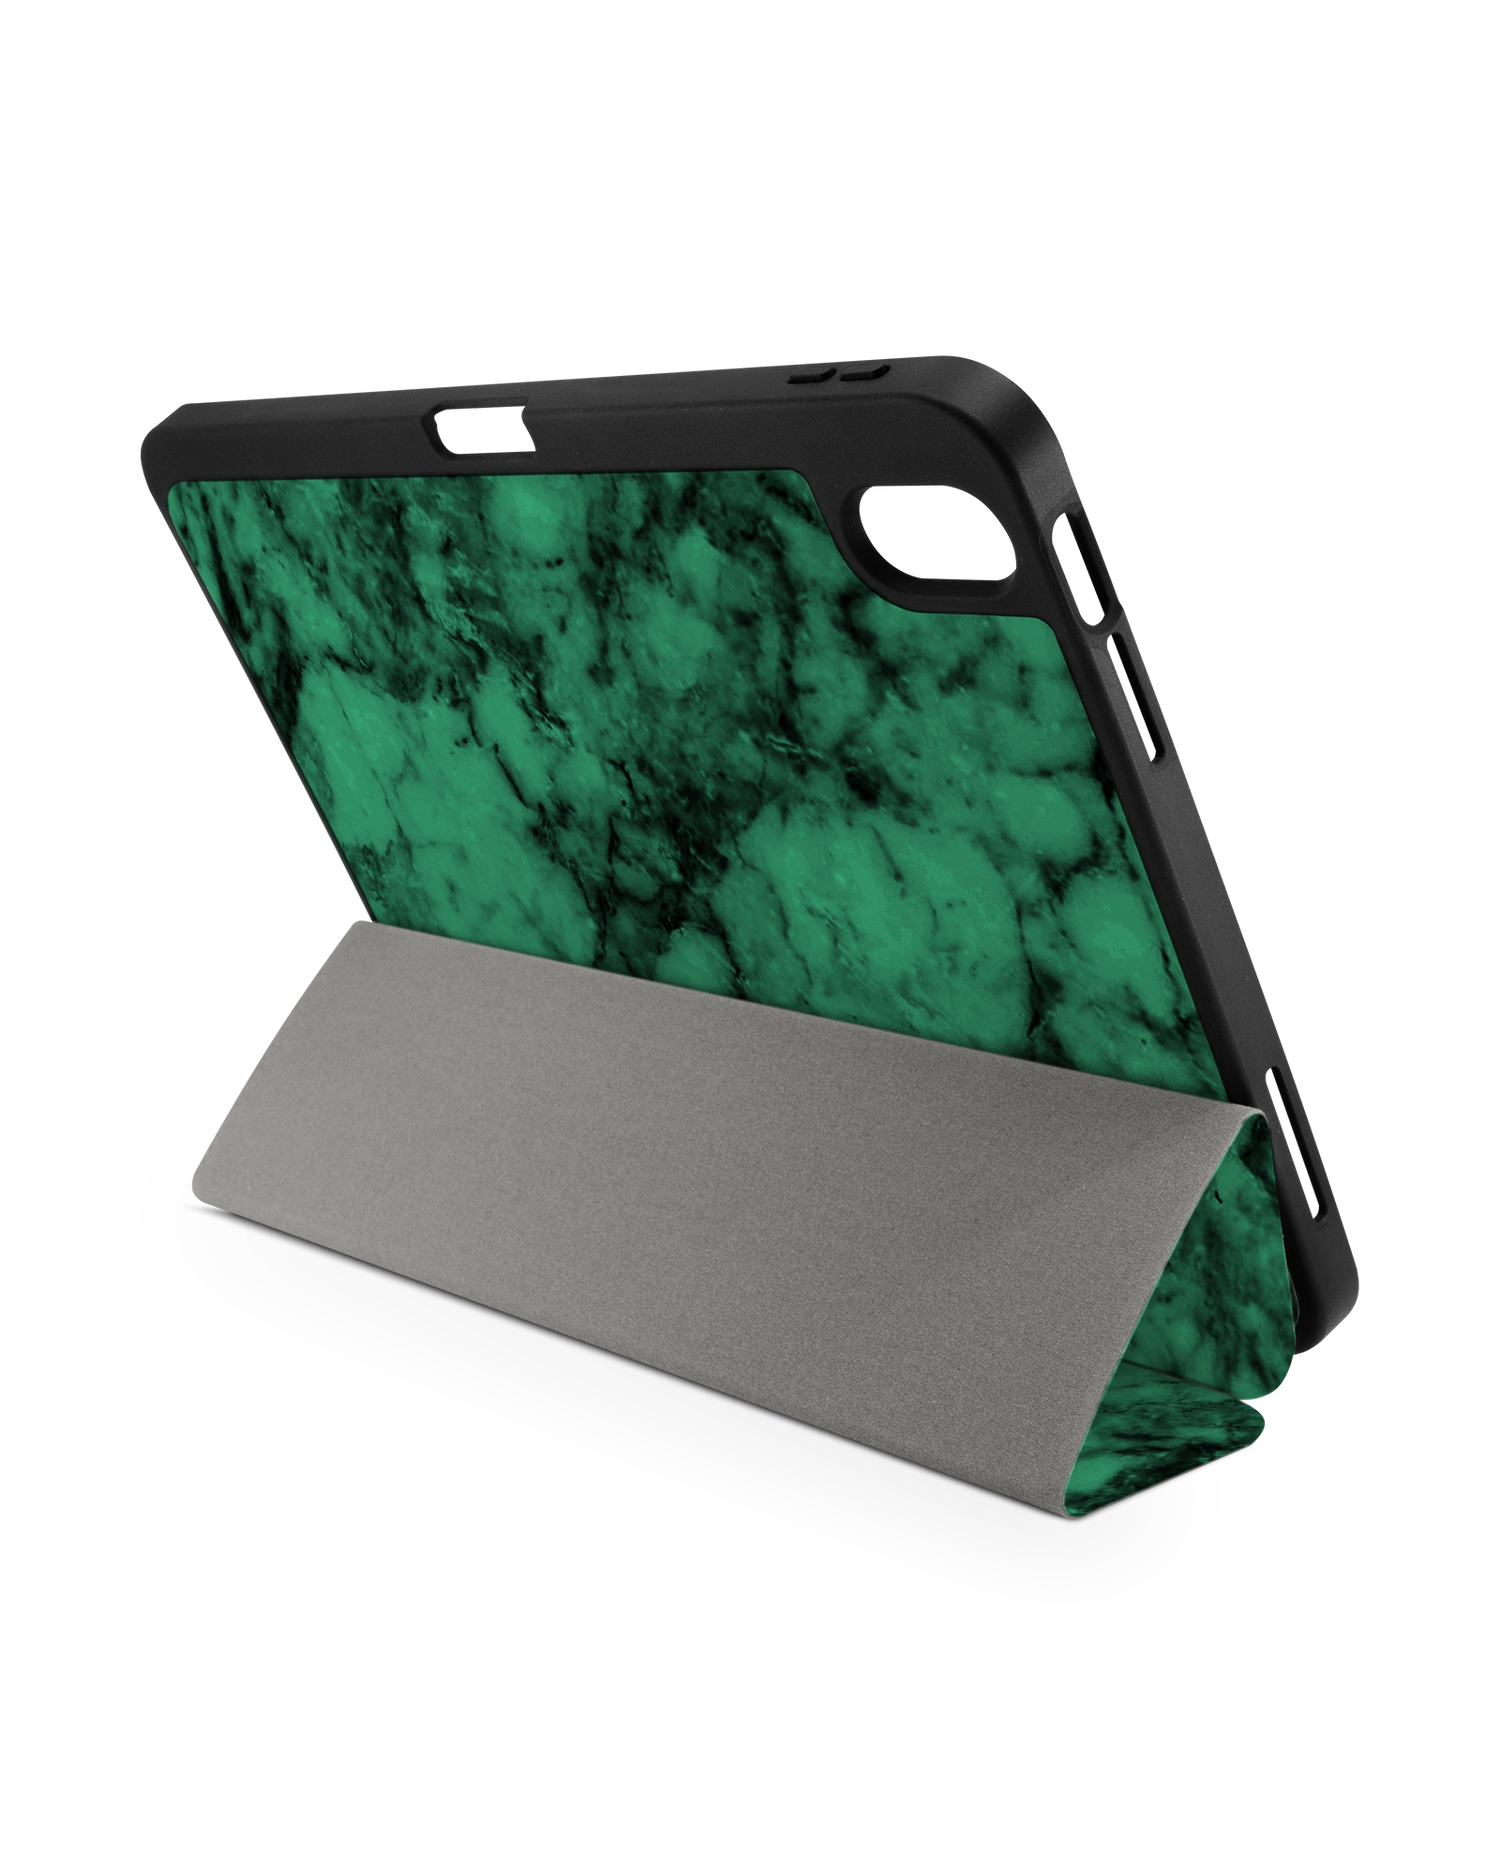 Green Marble iPad Case with Pencil Holder for Apple iPad (10th Generation): Set up in landscape format (back view)